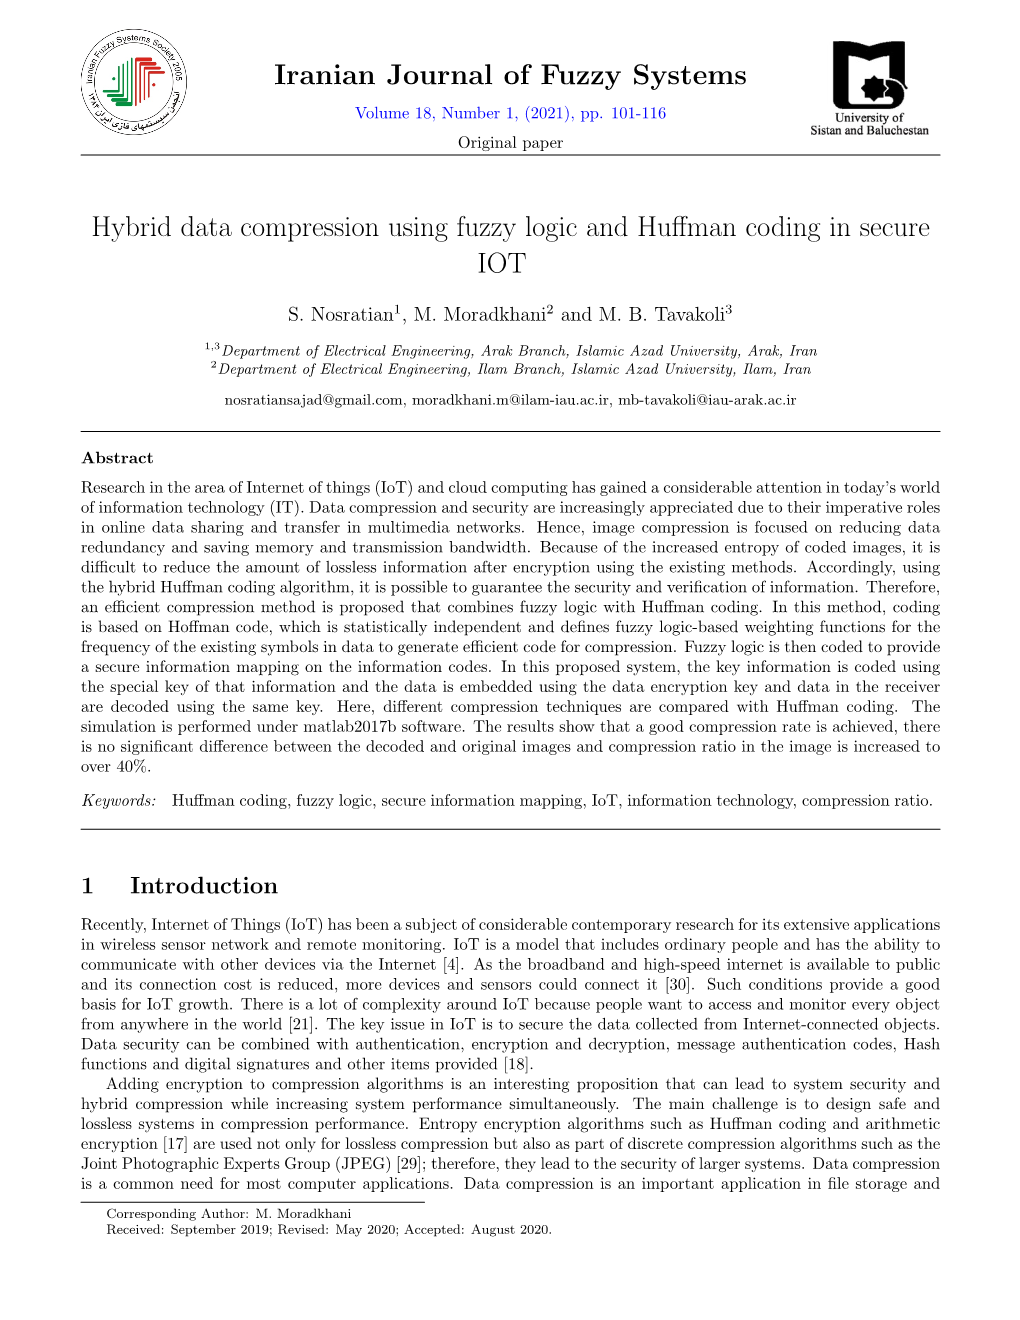 Iranian Journal of Fuzzy Systems Hybrid Data Compression Using